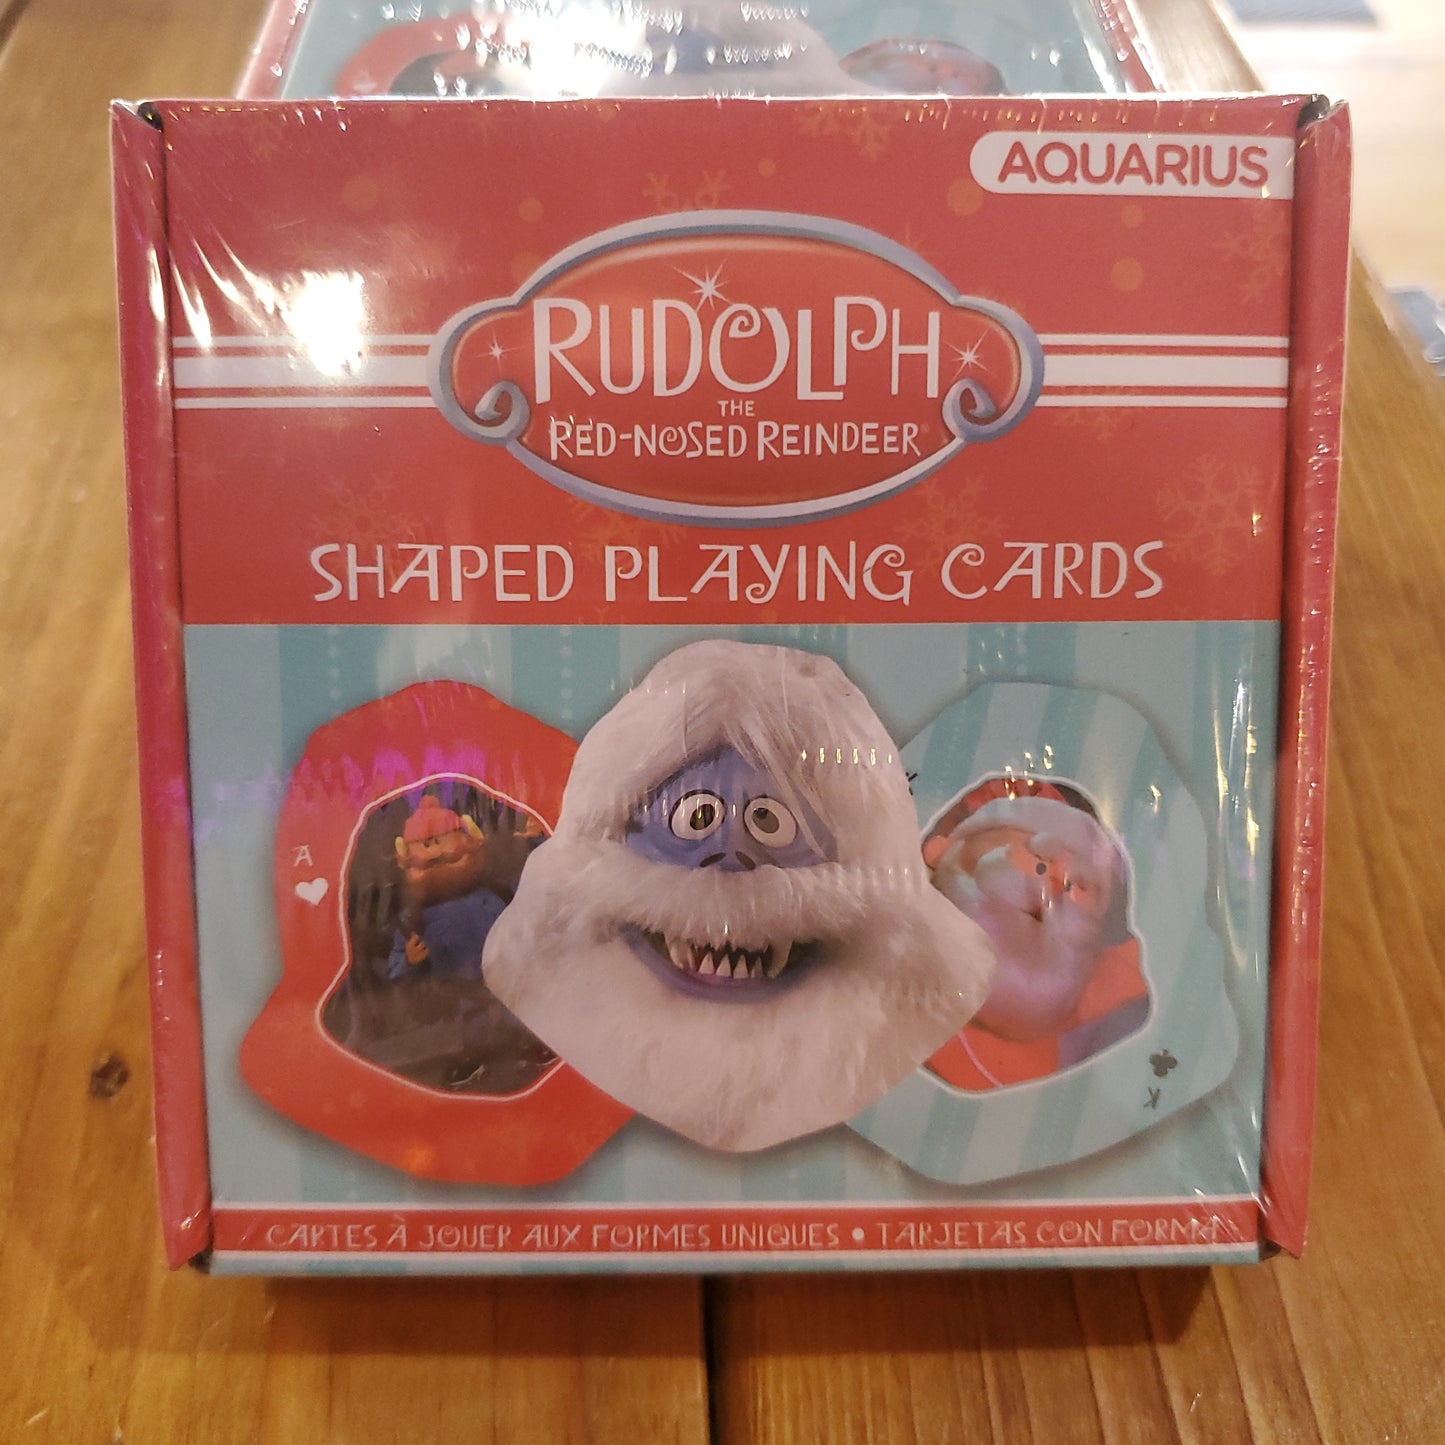 Rudolph the Red-Nosed Reindeer - Shaped Playing Cards by Aquarius